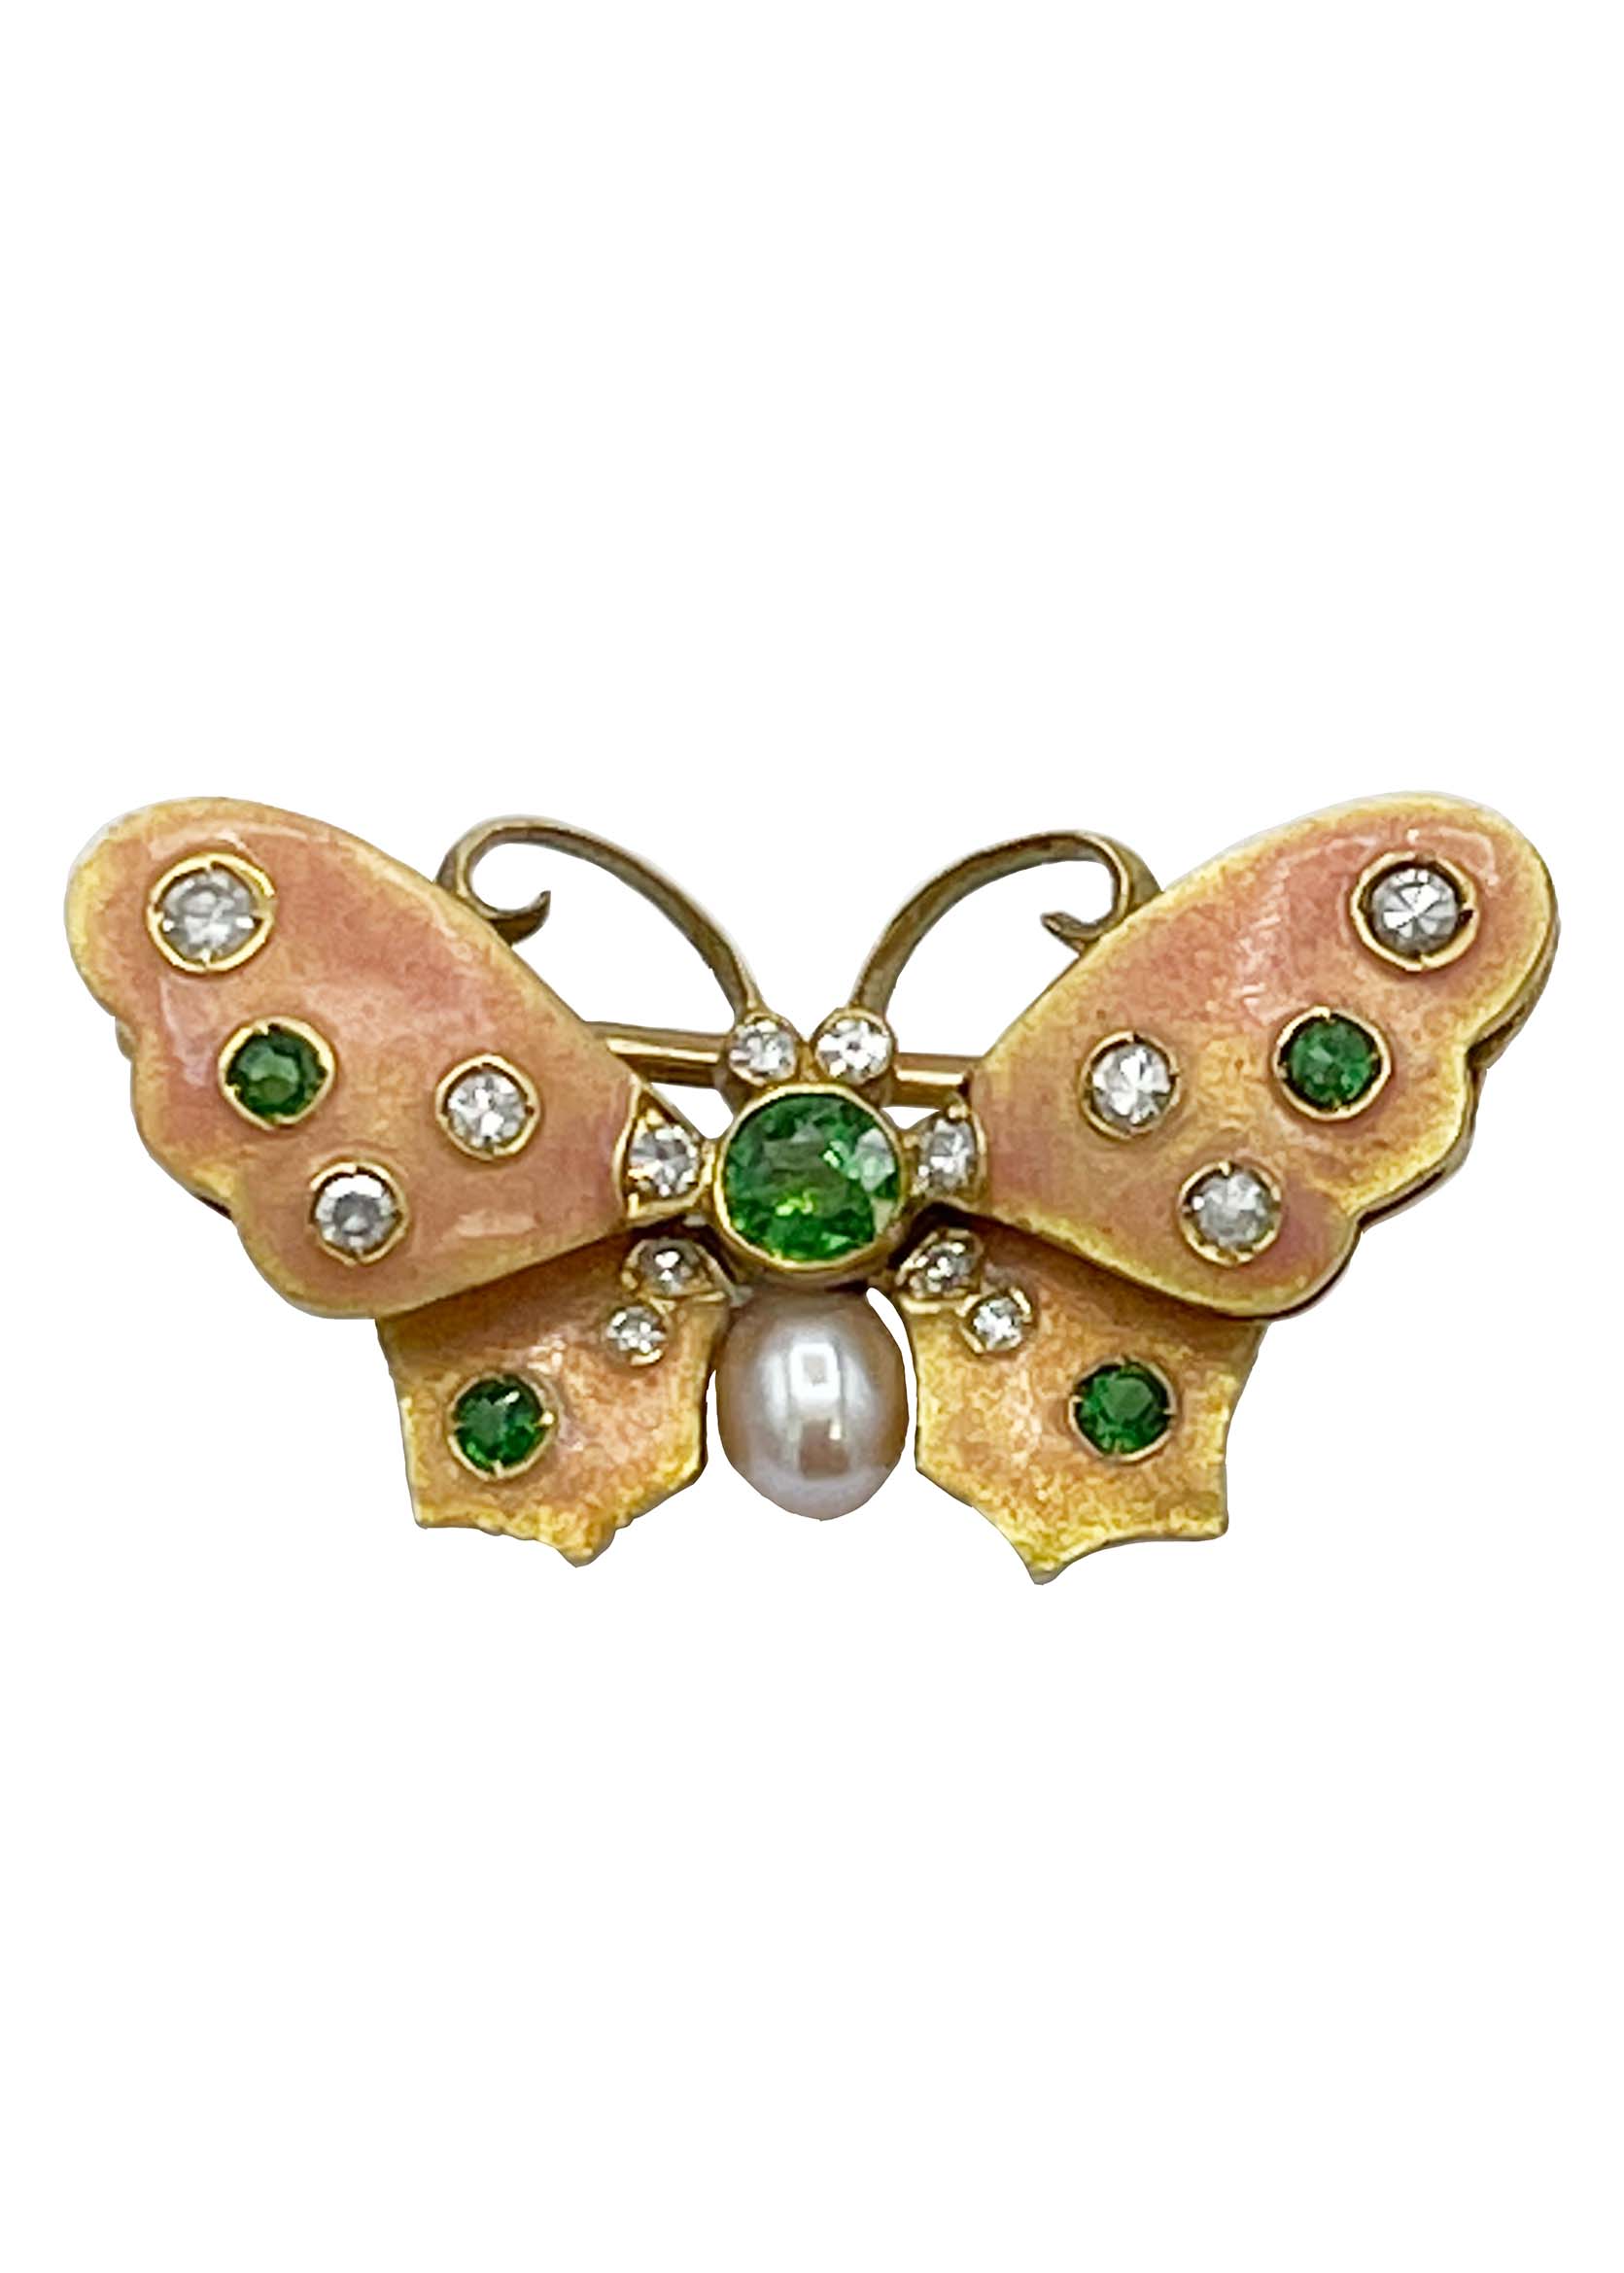 18k Gold Enamel Butterfly Brooch with Emeralds and Diamonds Image